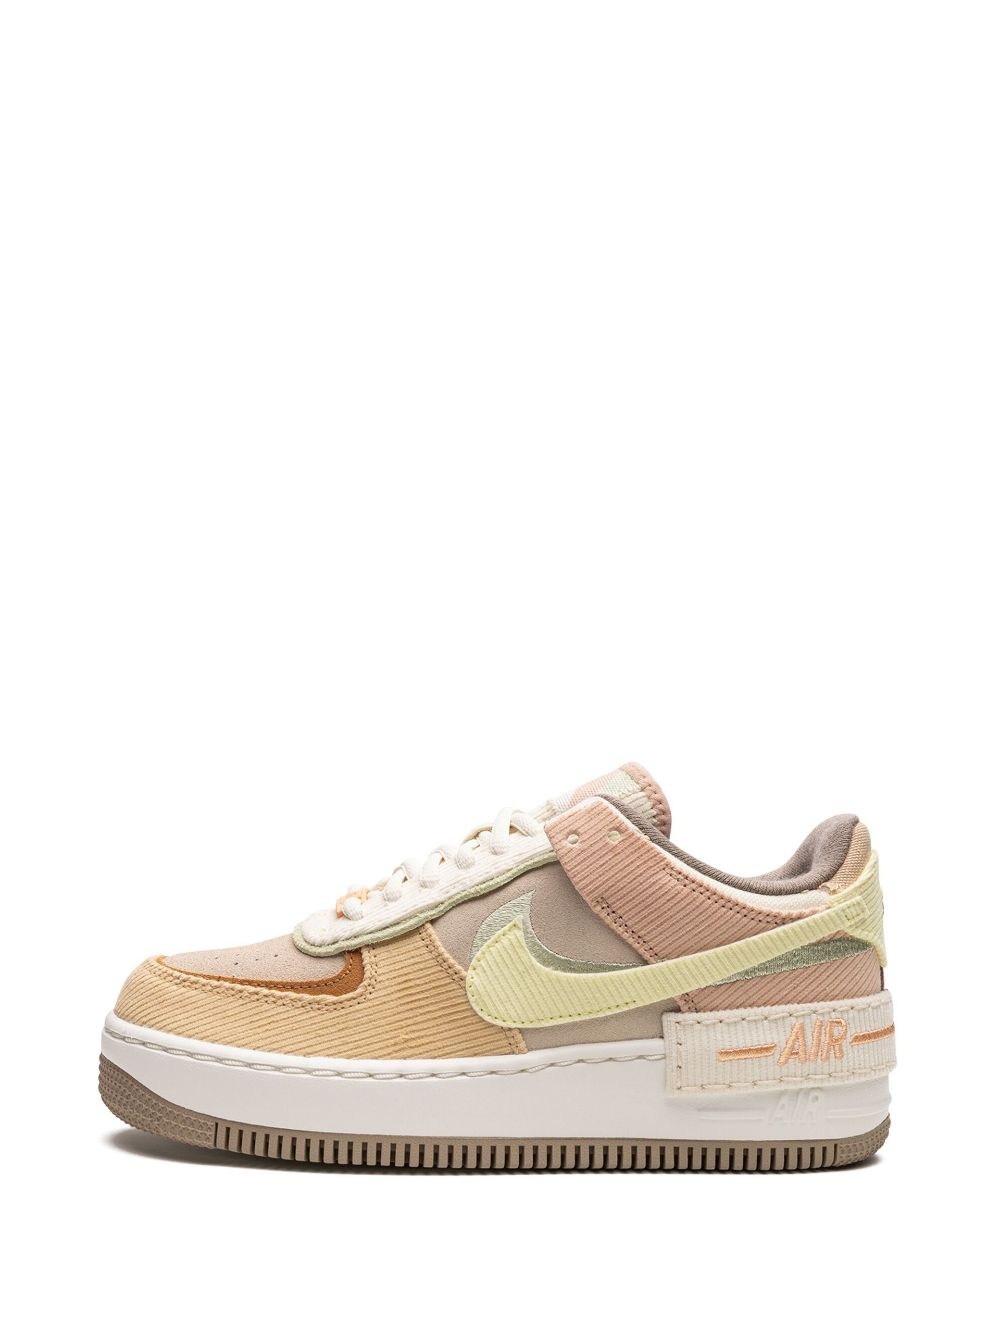 AF1 Shadow "Coconut Milk/Citron Tint" sneakers - 5